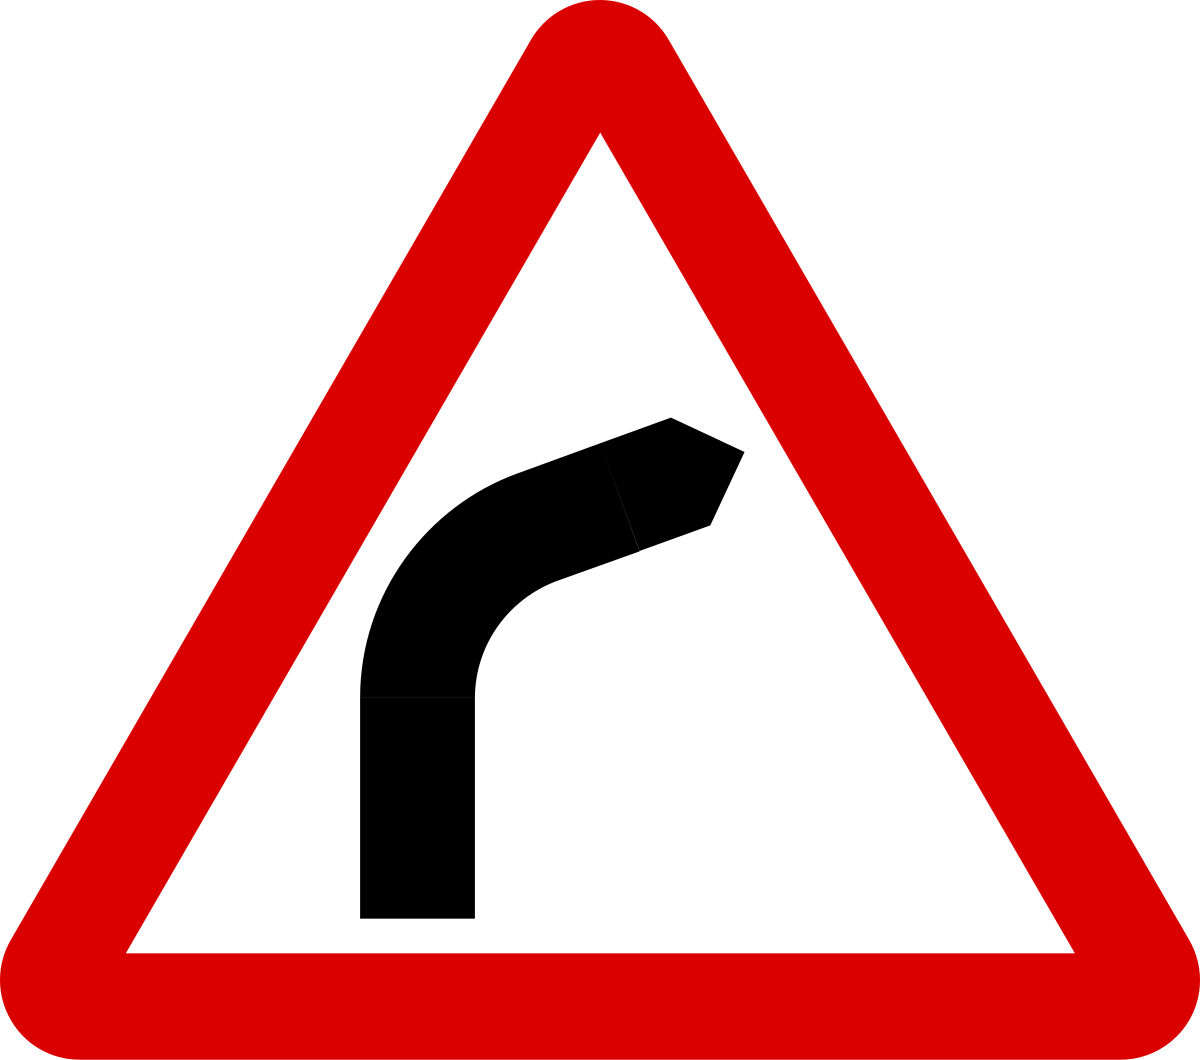 File:Mauritius Road Signs - Warning Sign - Bend to right.svg ...